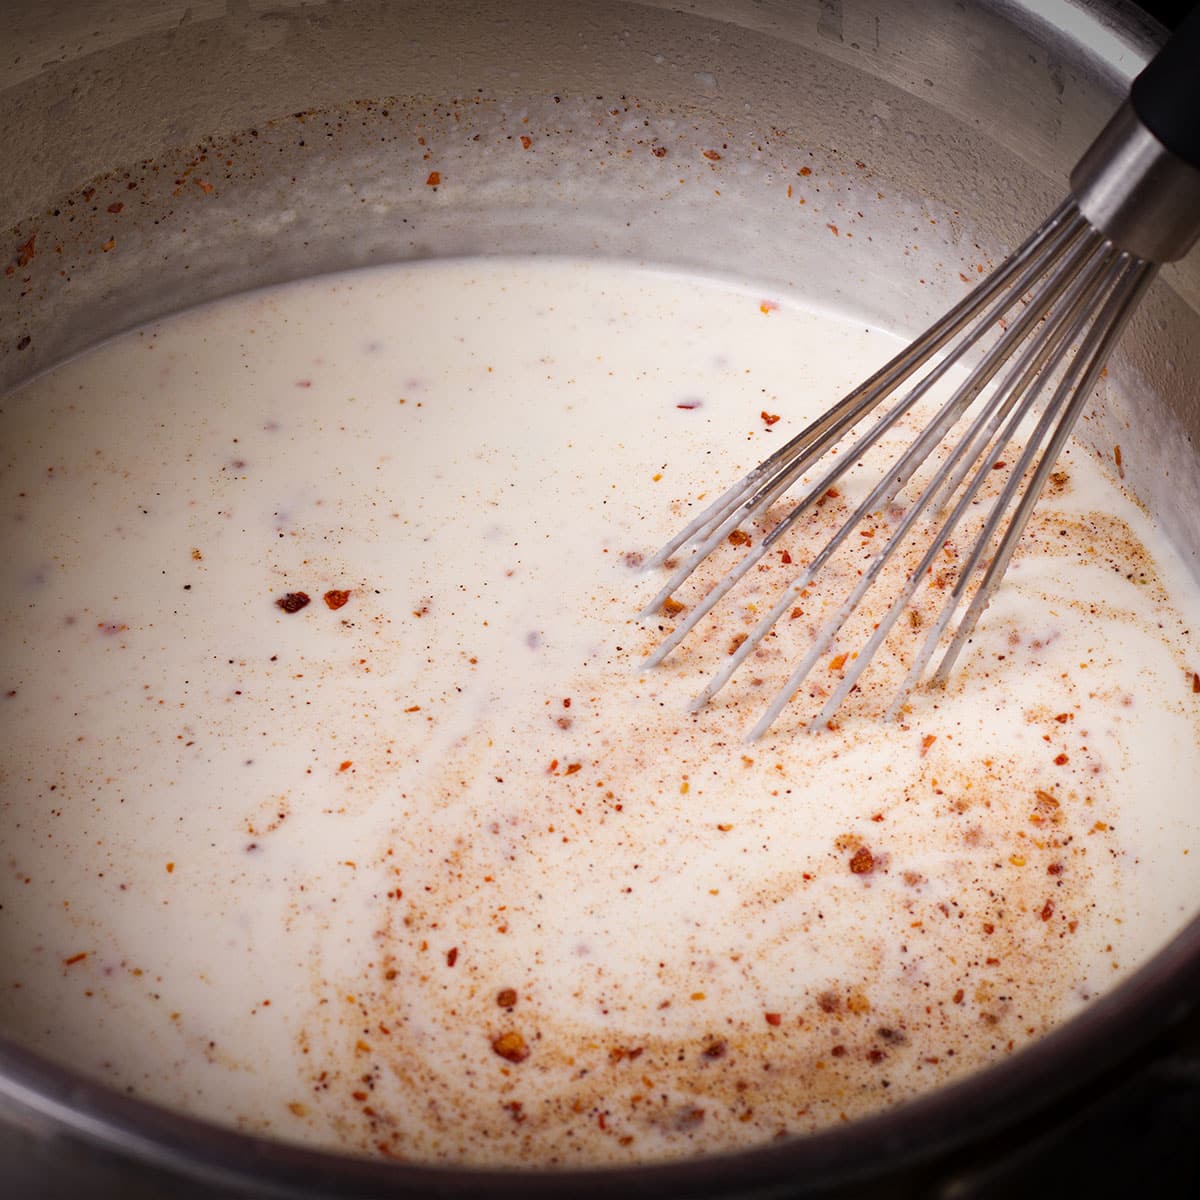 Stir nutmeg and crushed red pepper flakes into the bechamel sauce.